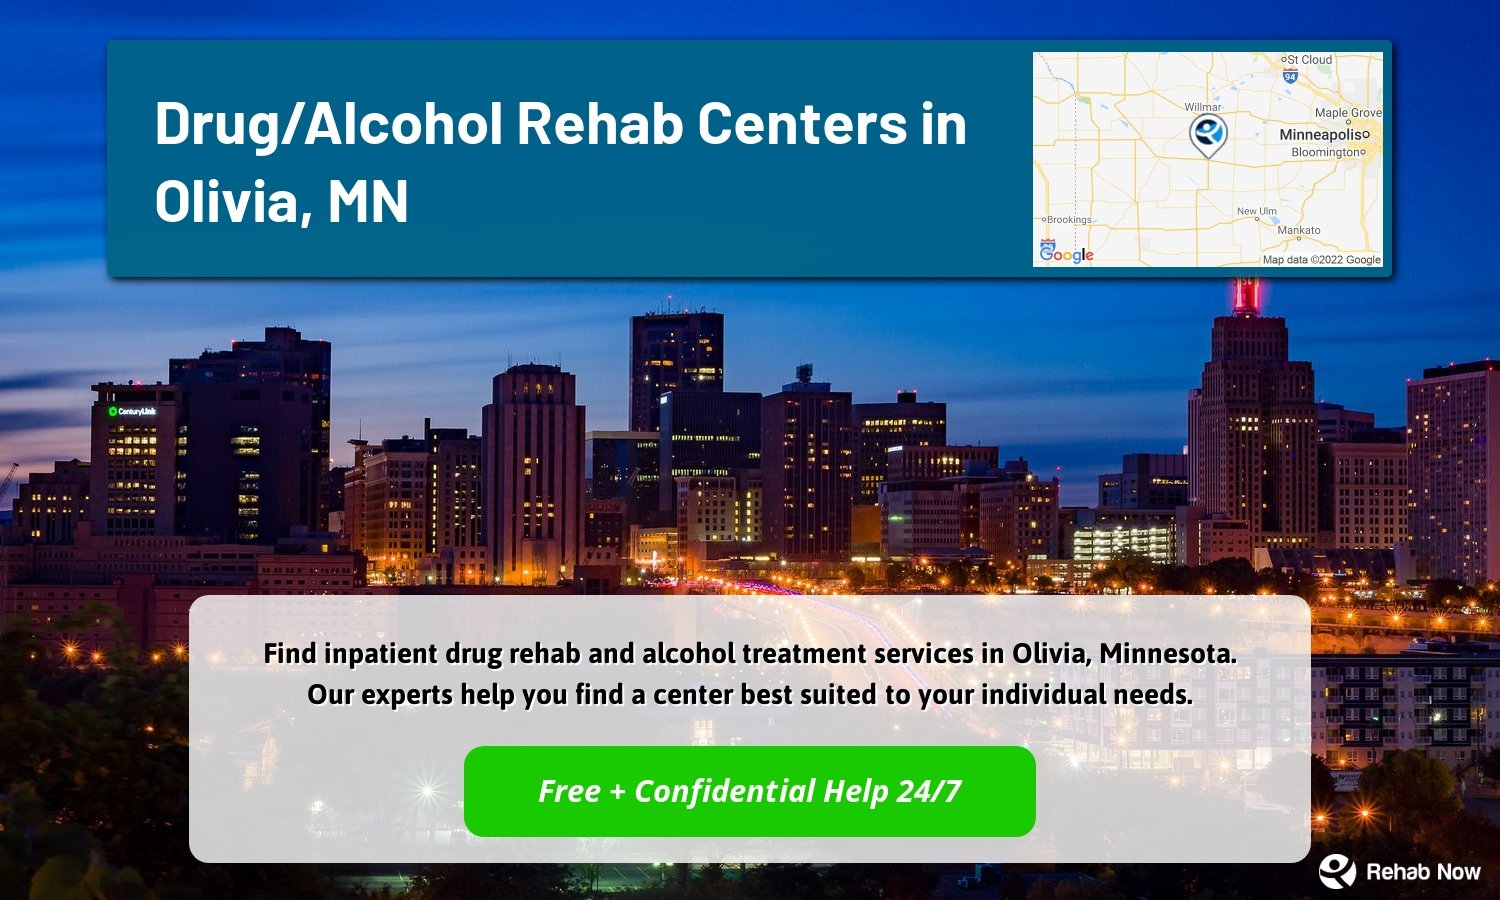 Find inpatient drug rehab and alcohol treatment services in Olivia, Minnesota. Our experts help you find a center best suited to your individual needs.